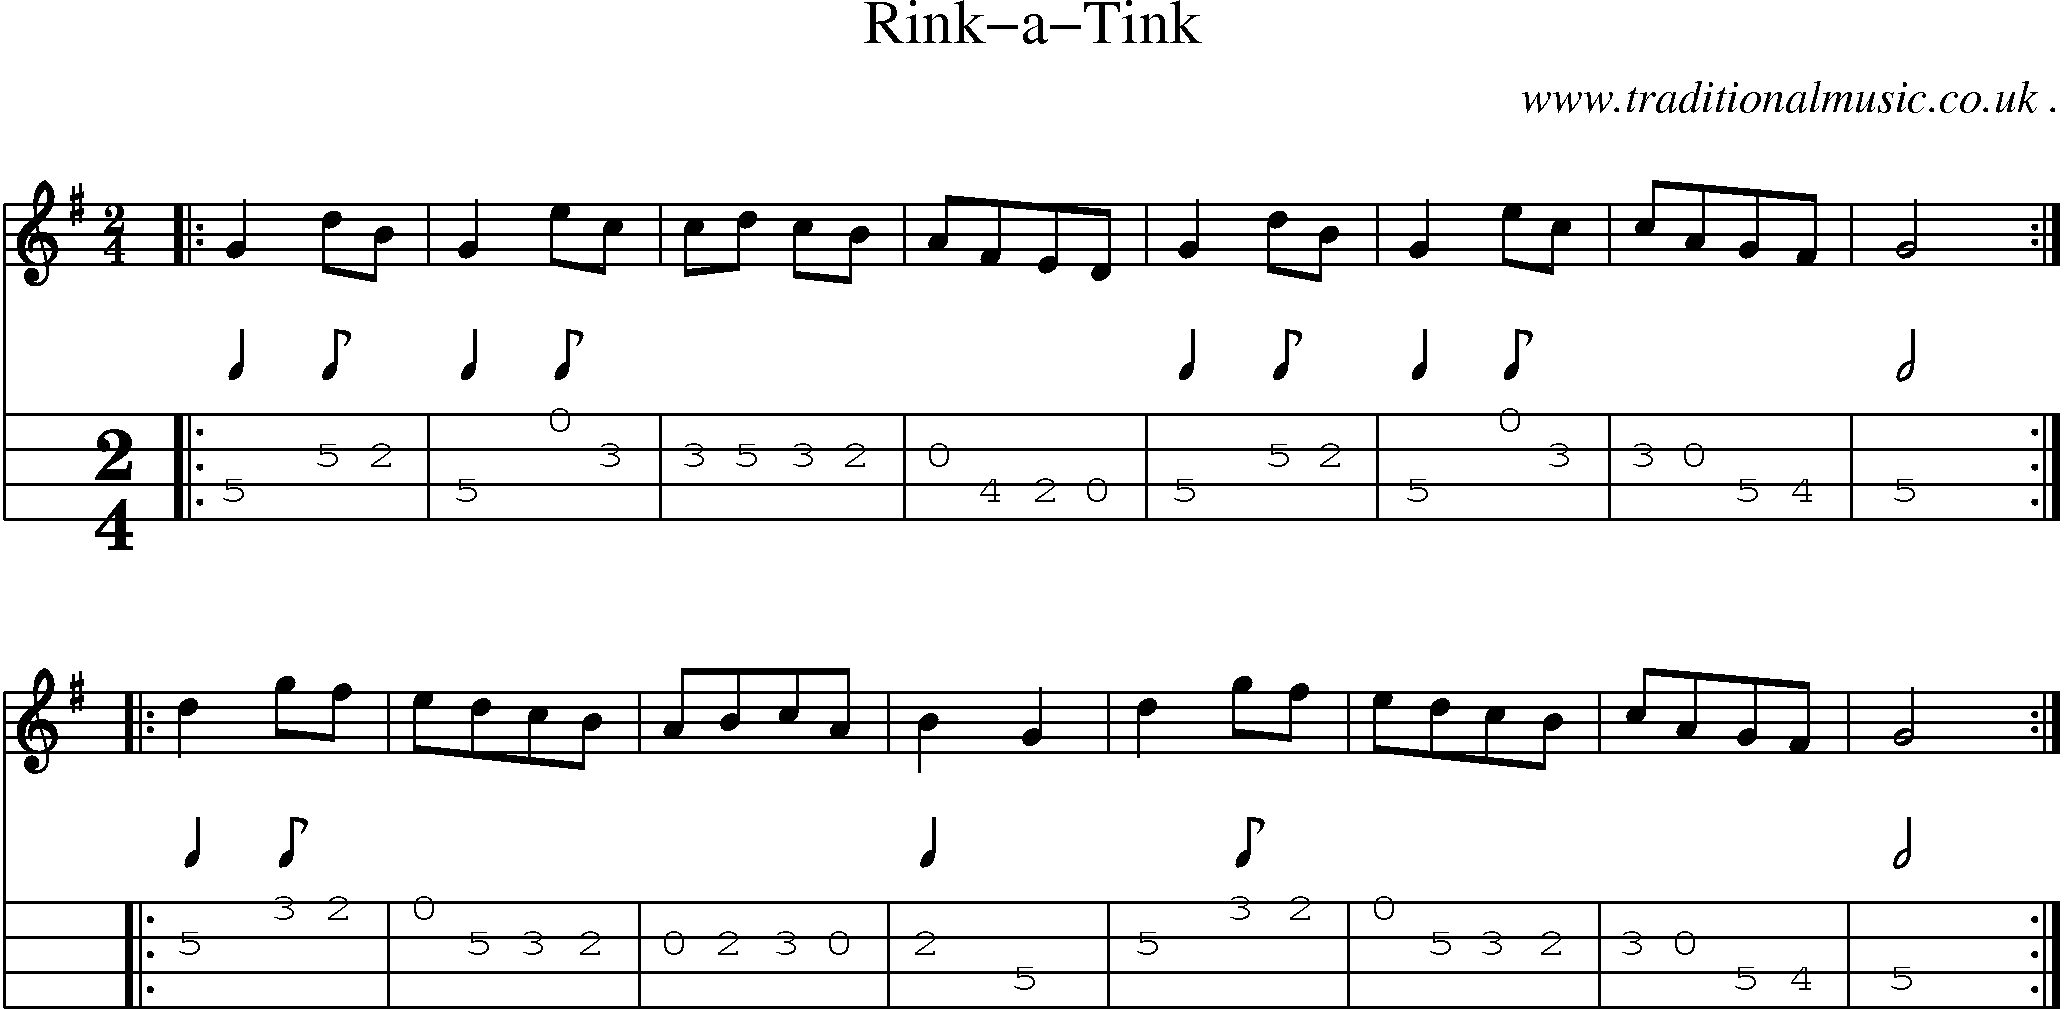 Sheet-Music and Mandolin Tabs for Rink-a-tink